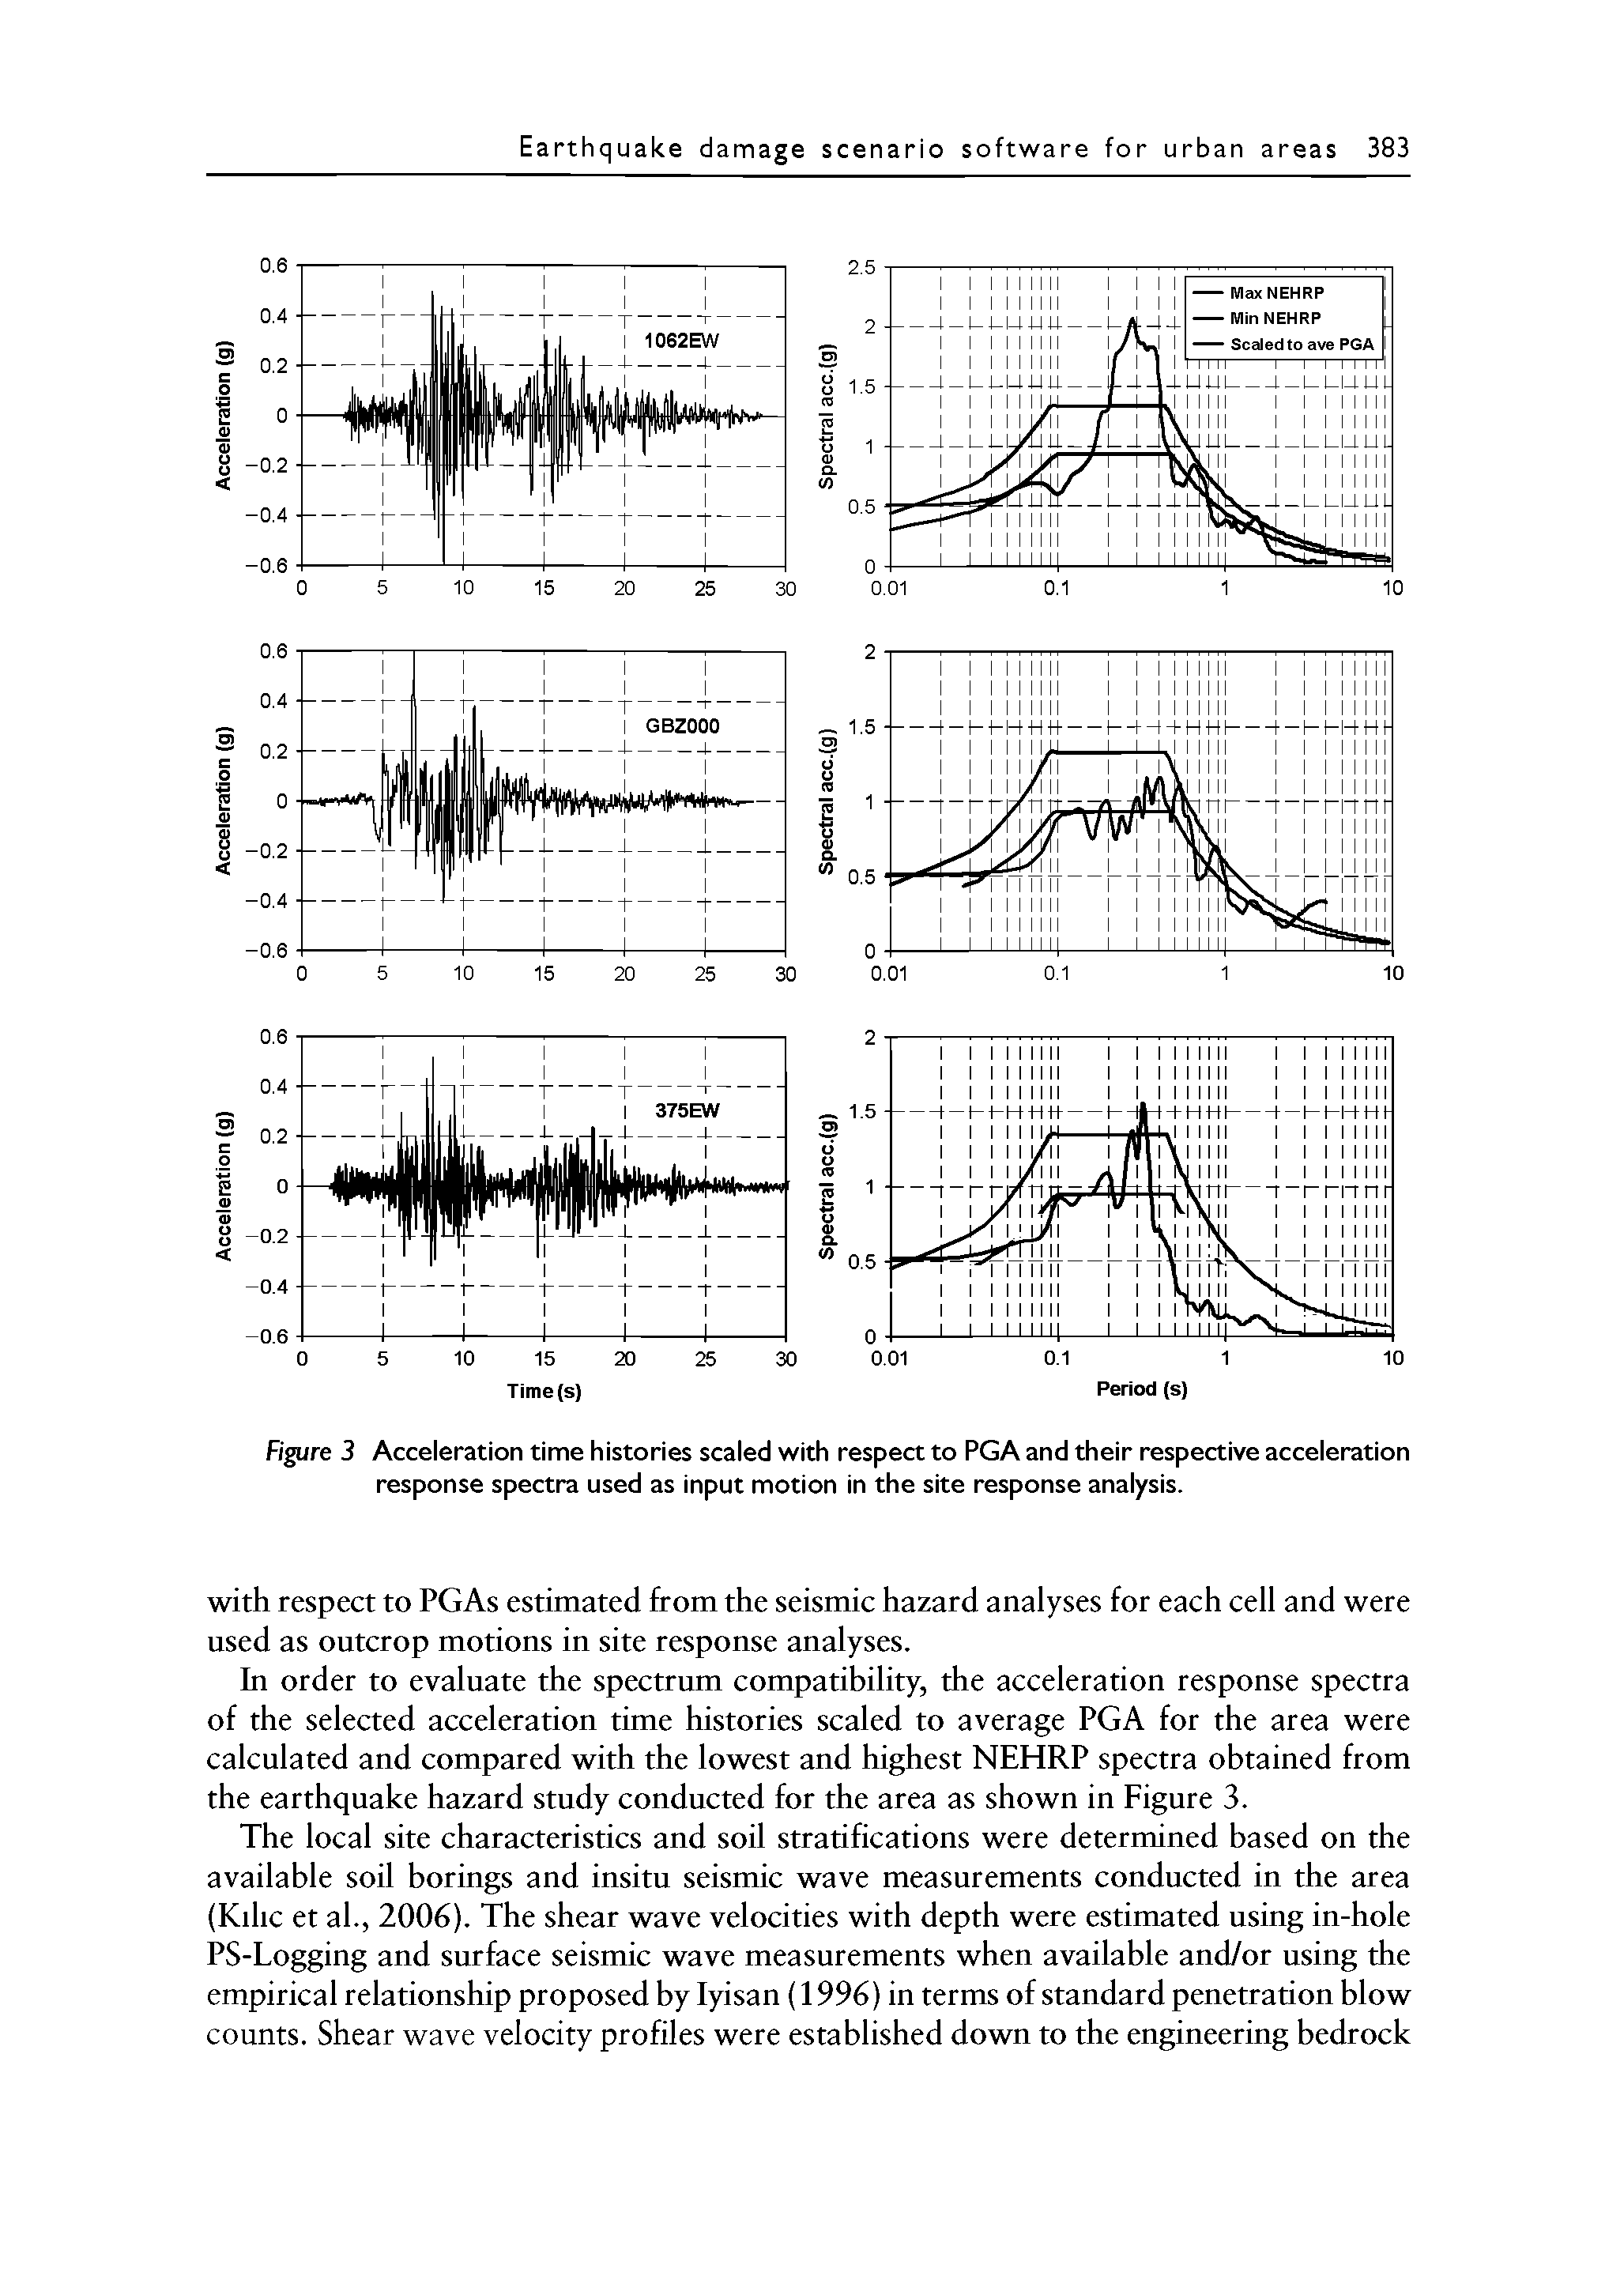 Figure 3 Acceleration time histories scaled with respect to PGA and their respective acceleration response spectra used as input motion in the site response analysis.